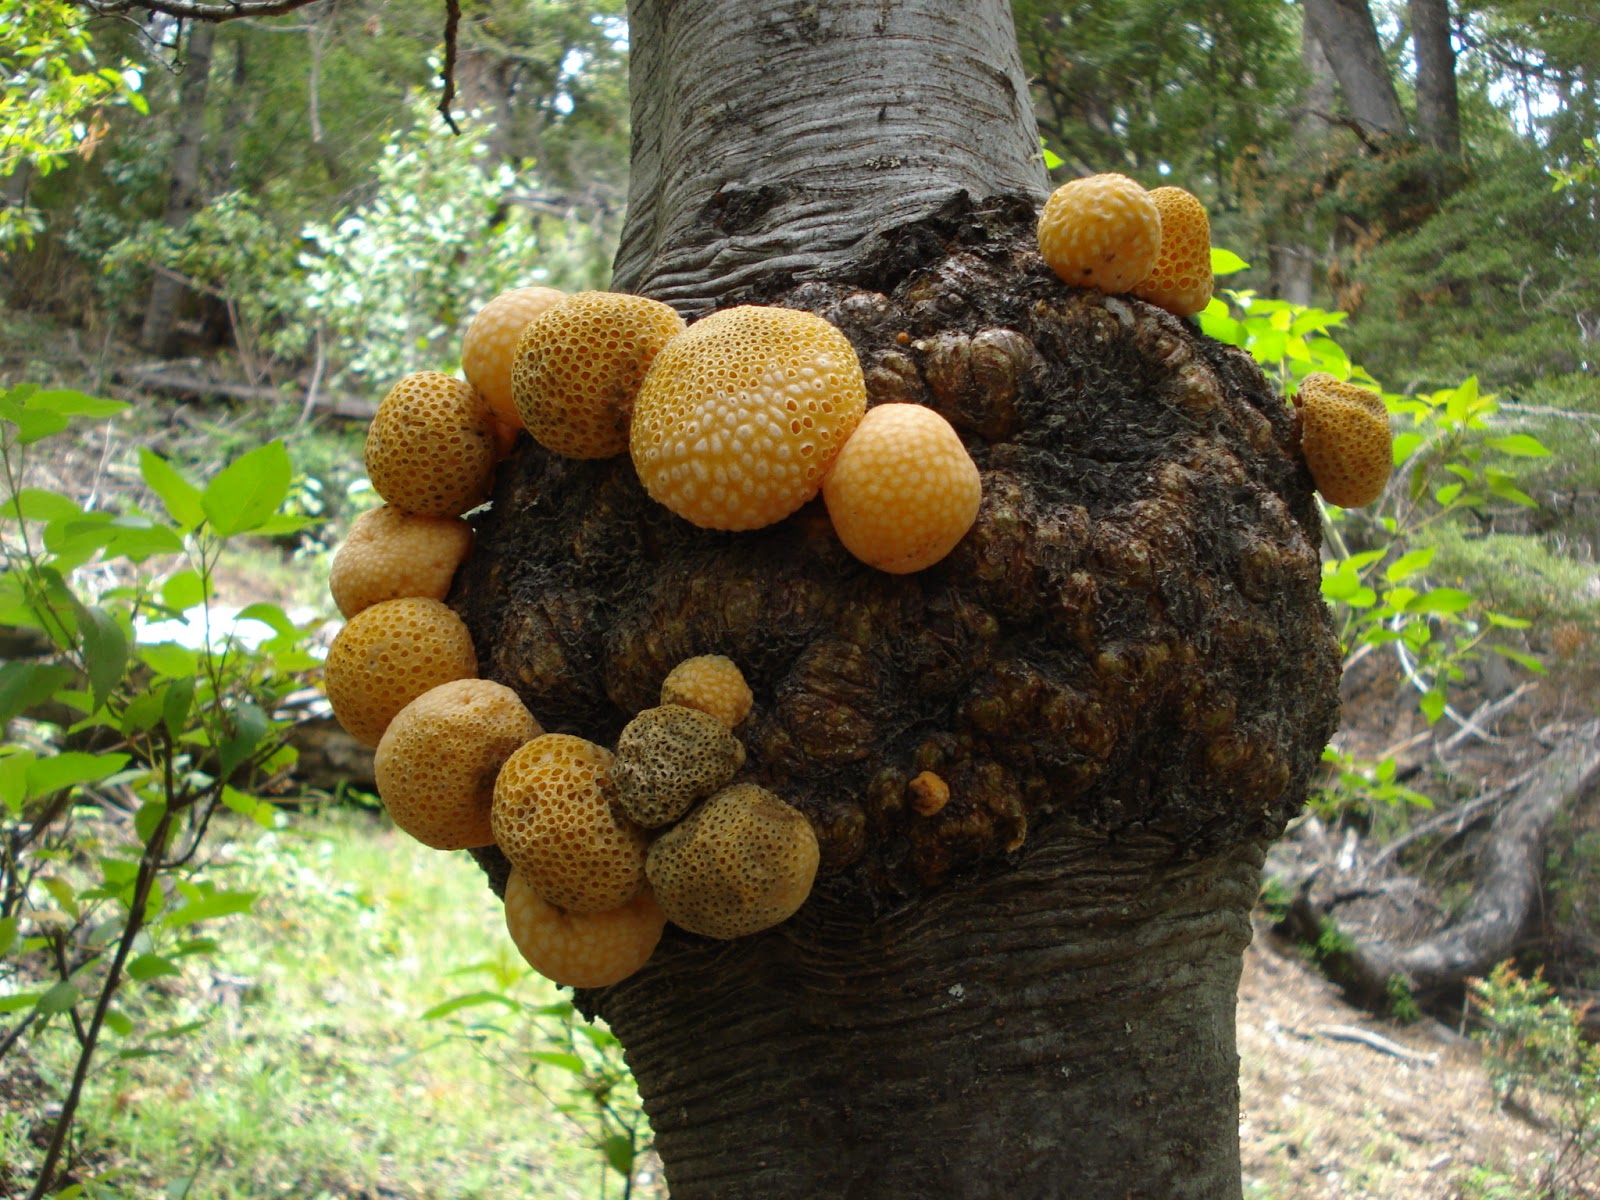 Galls on southern beech trees in Patagonia containing S. eubayanus